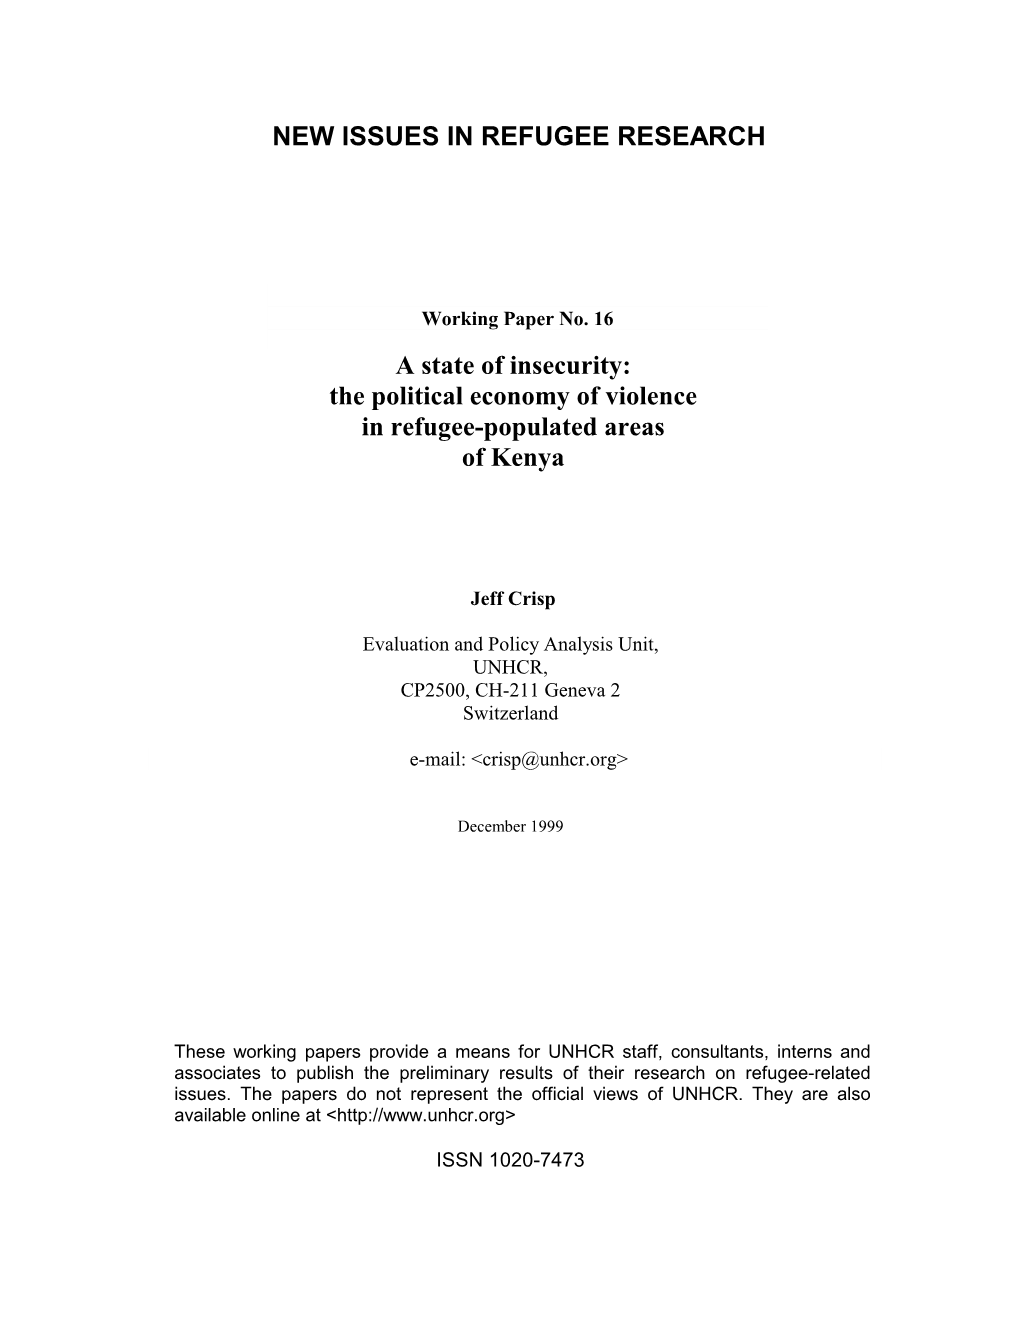 The Political Economy of Violence in Refugee-Populated Areas of Kenya